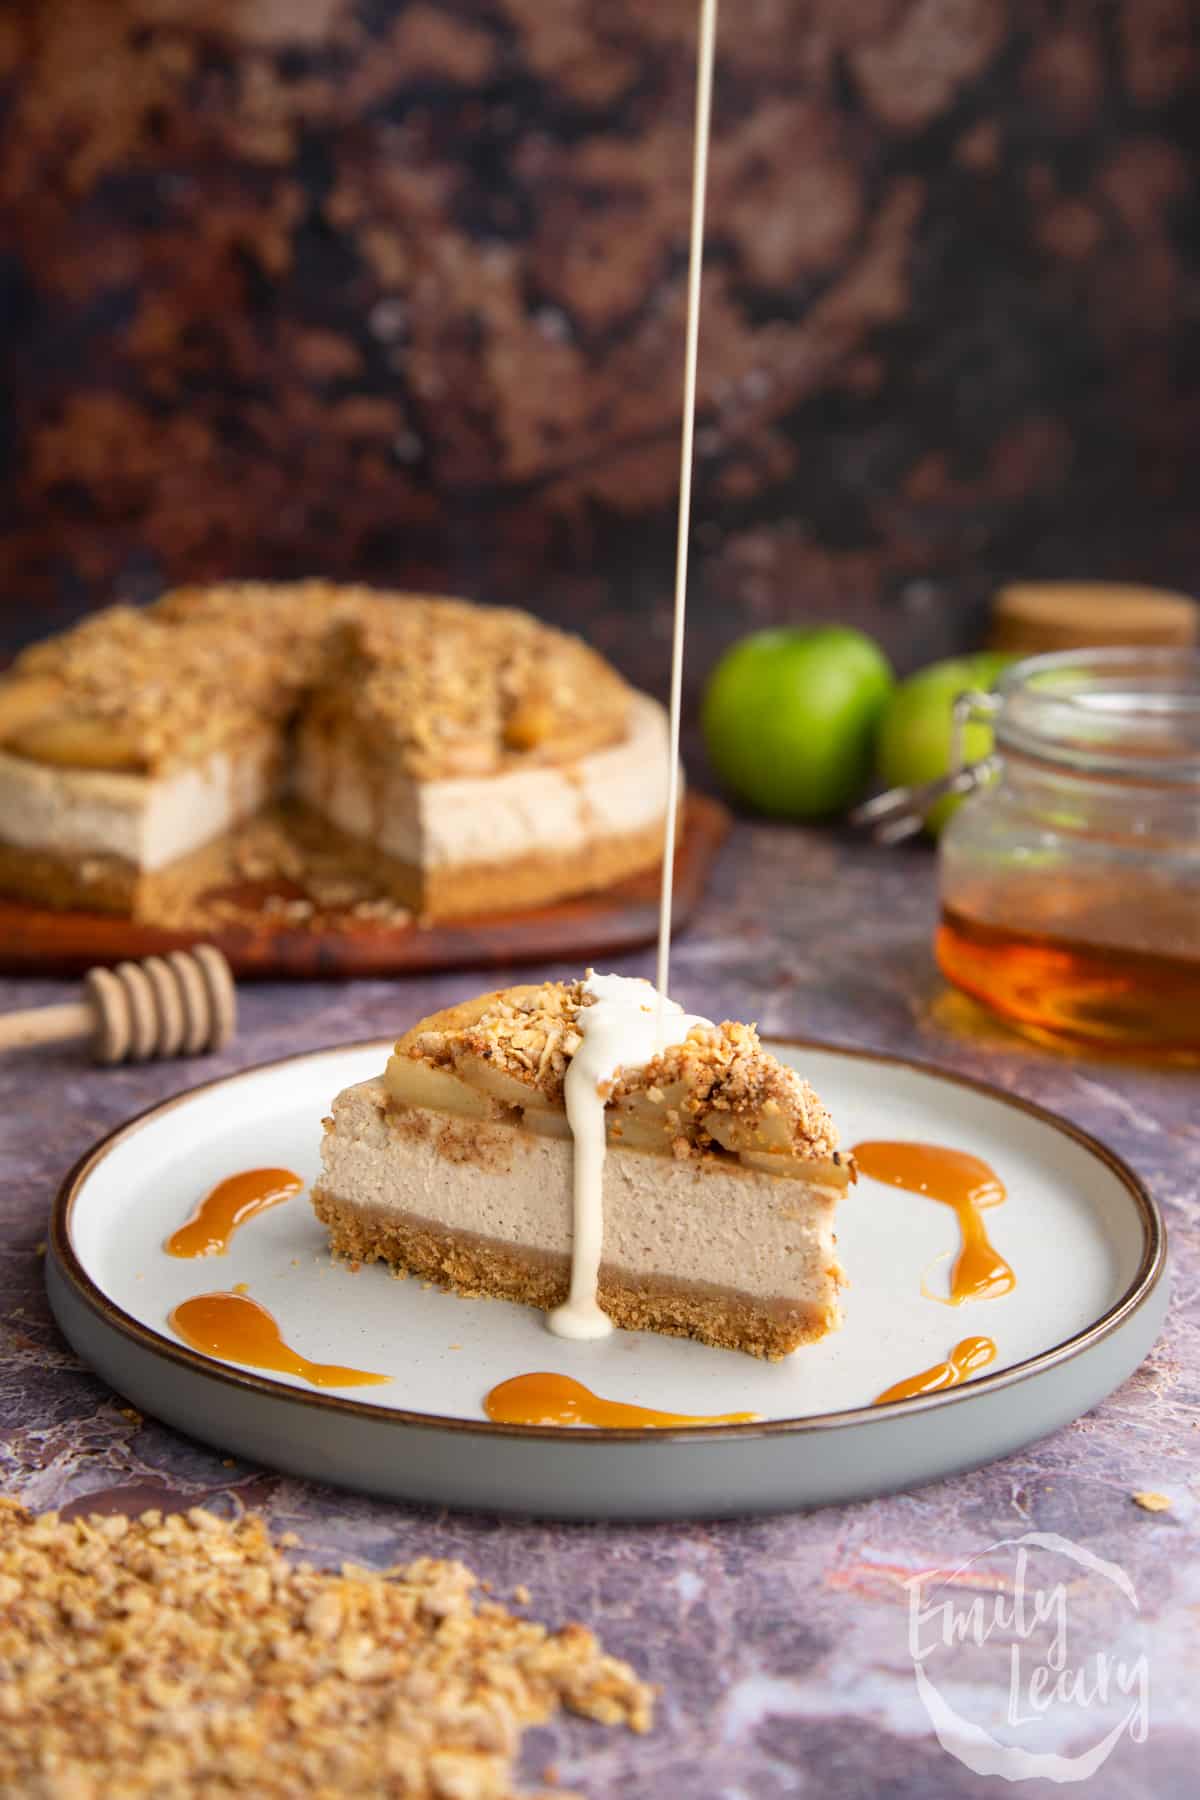 Adding a drizzle of cream onto a slice of the finished apple crumble cheesecake.